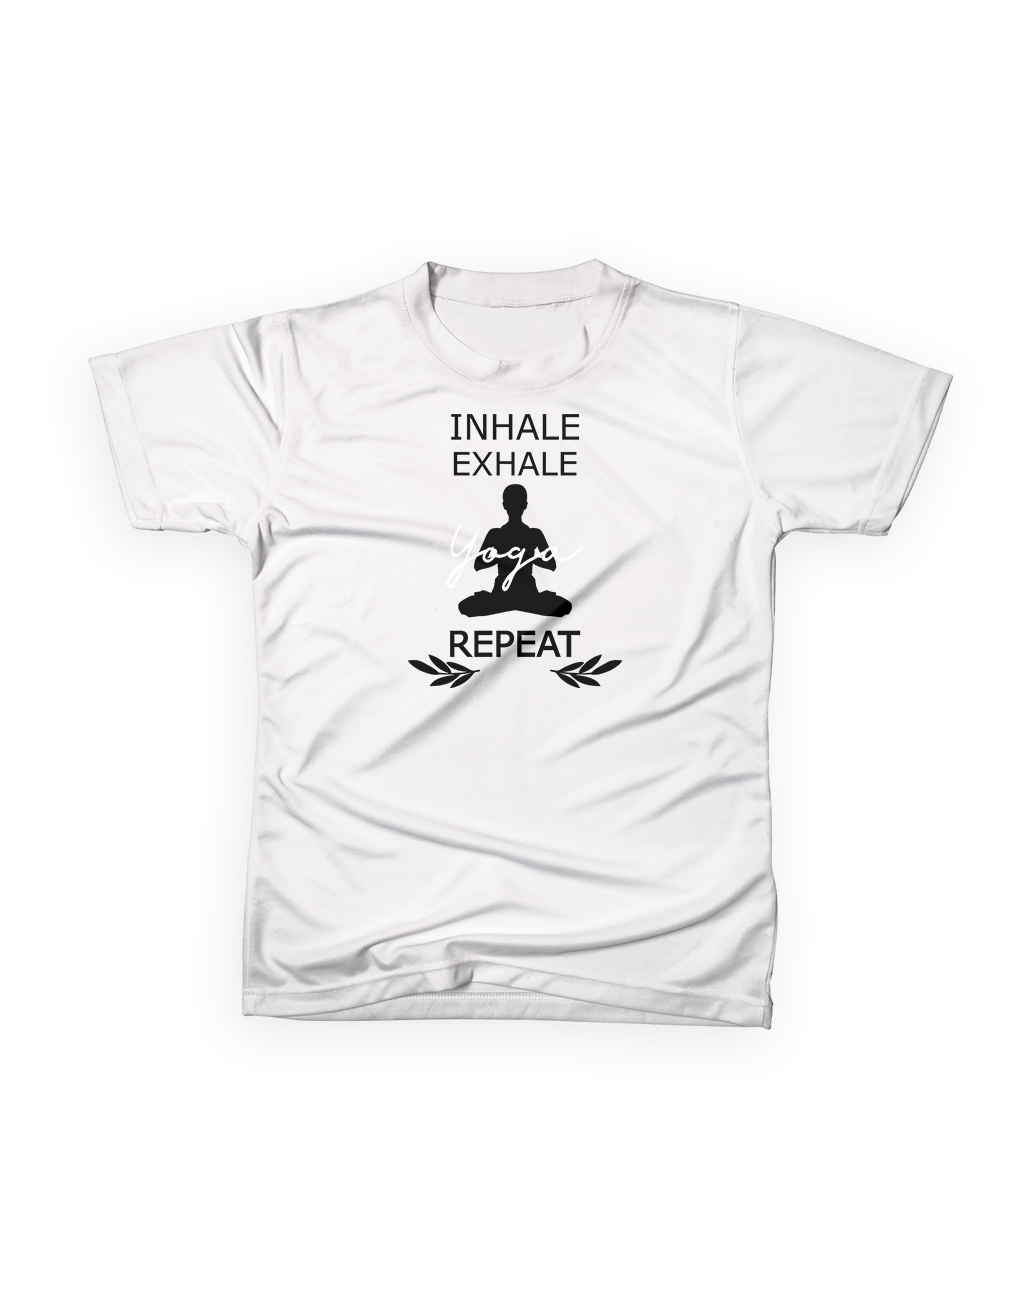 Inhale exhale yoga repeat T-shirt